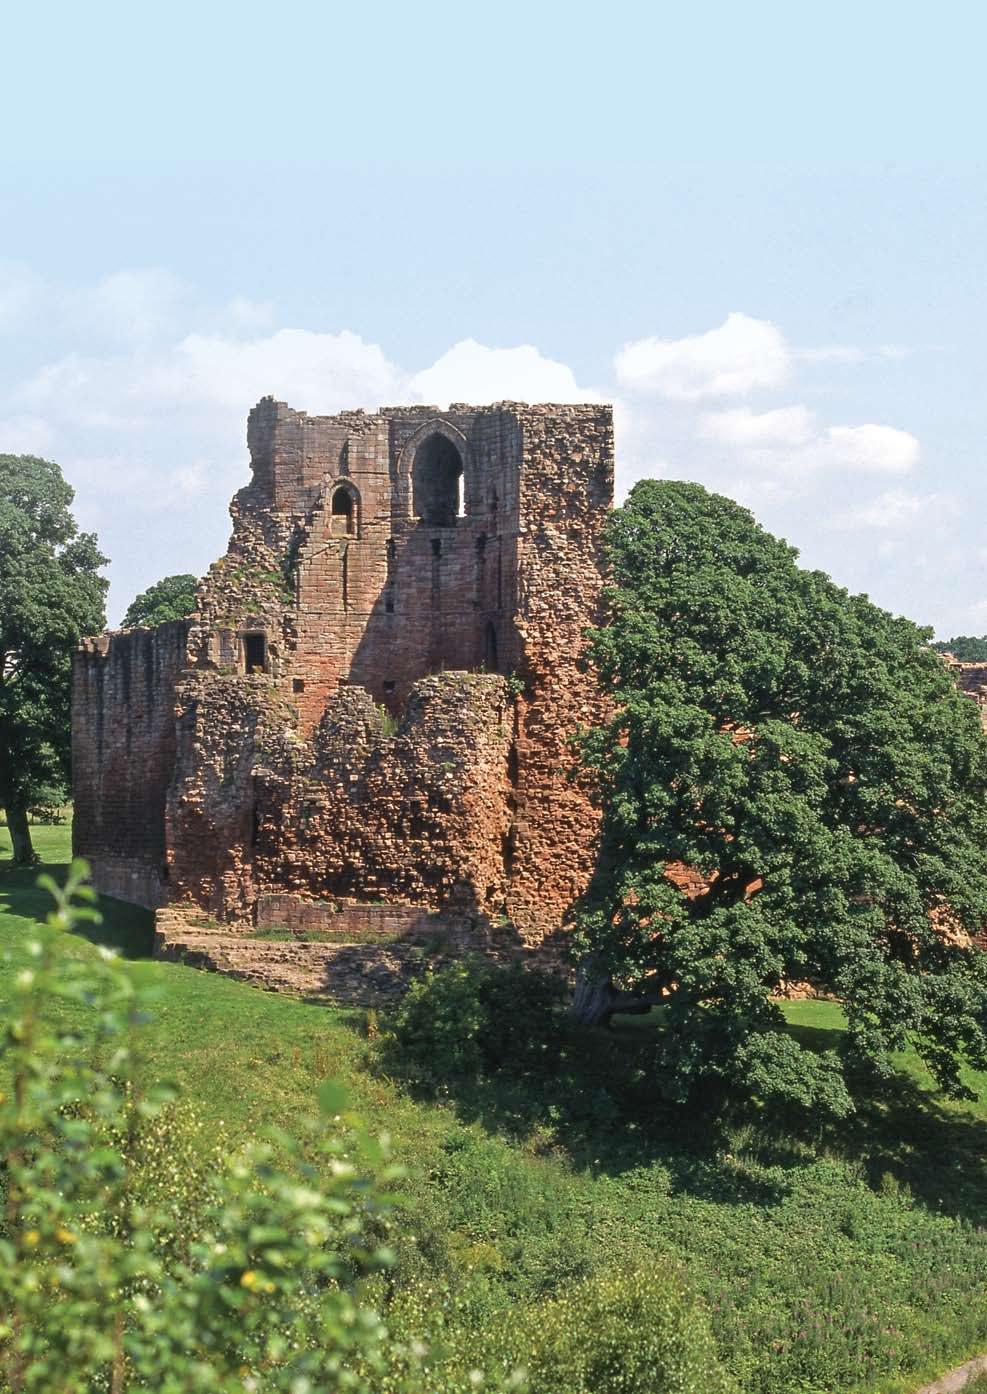 Bothwell Castle is one of